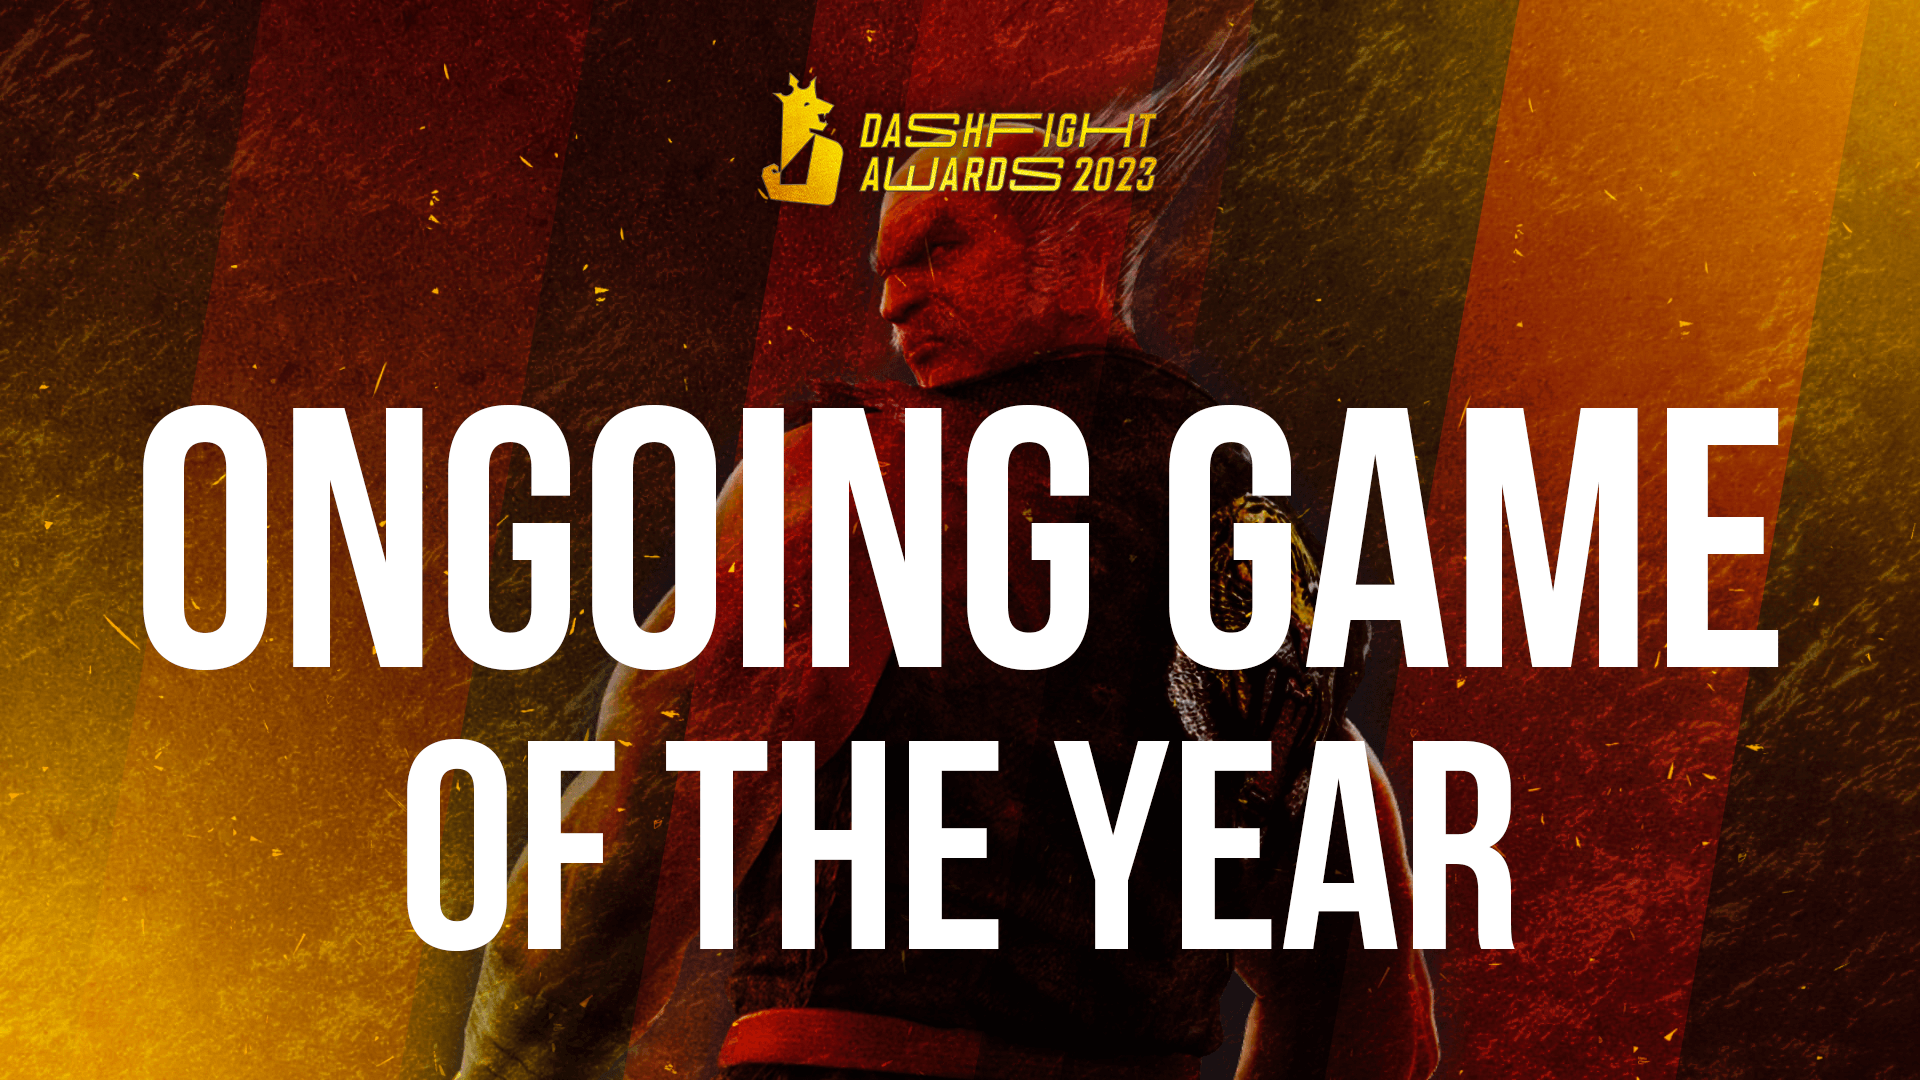 DashFight Awards 2023: Ongoing Game Of The Year